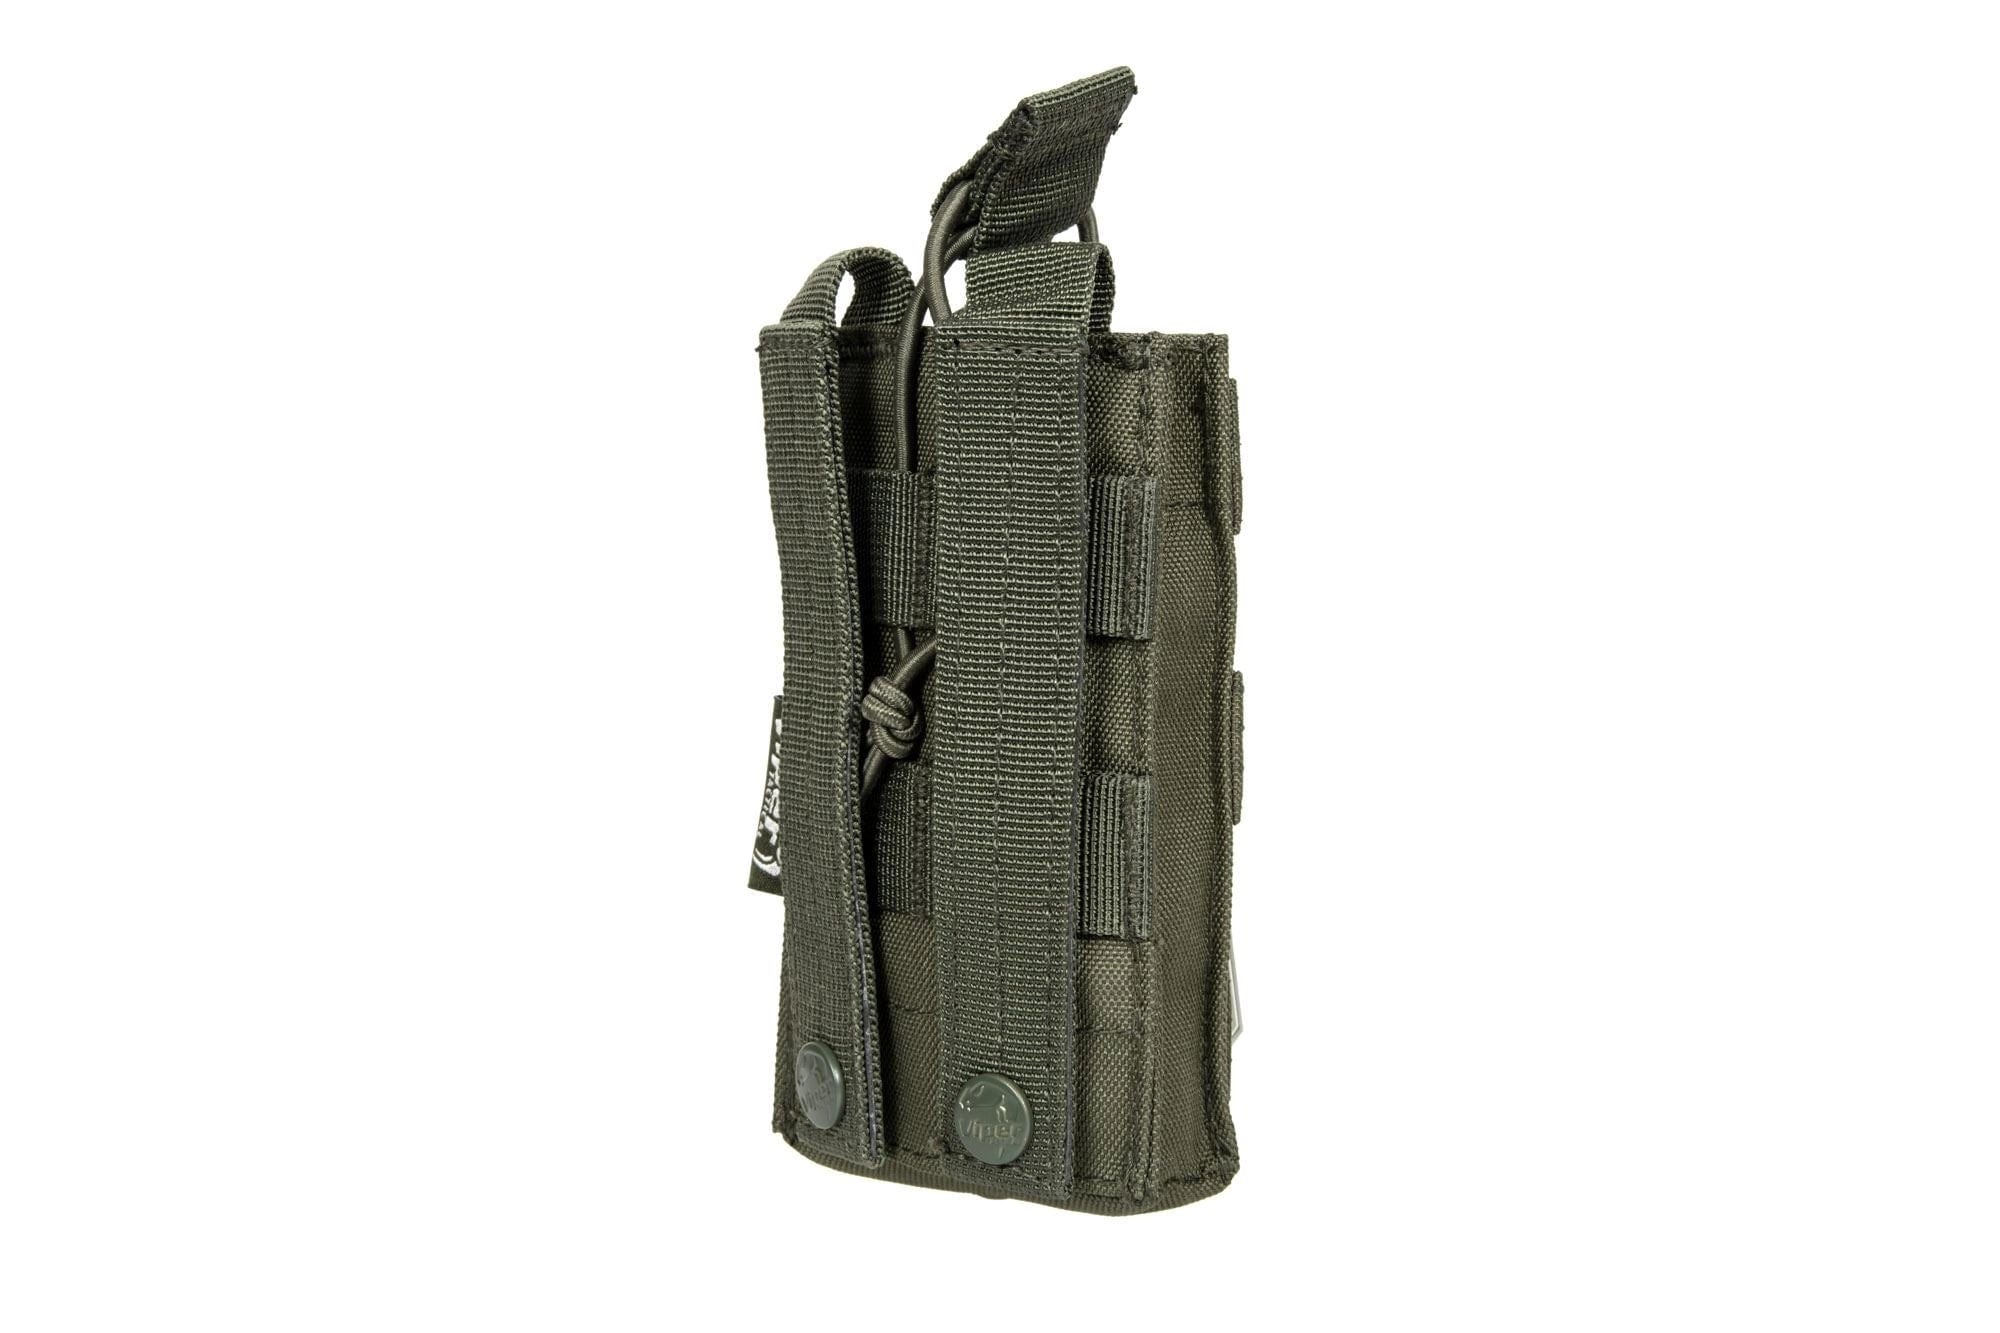 Quick Release Pouch for 1 M4/M16 type magazine - Olive